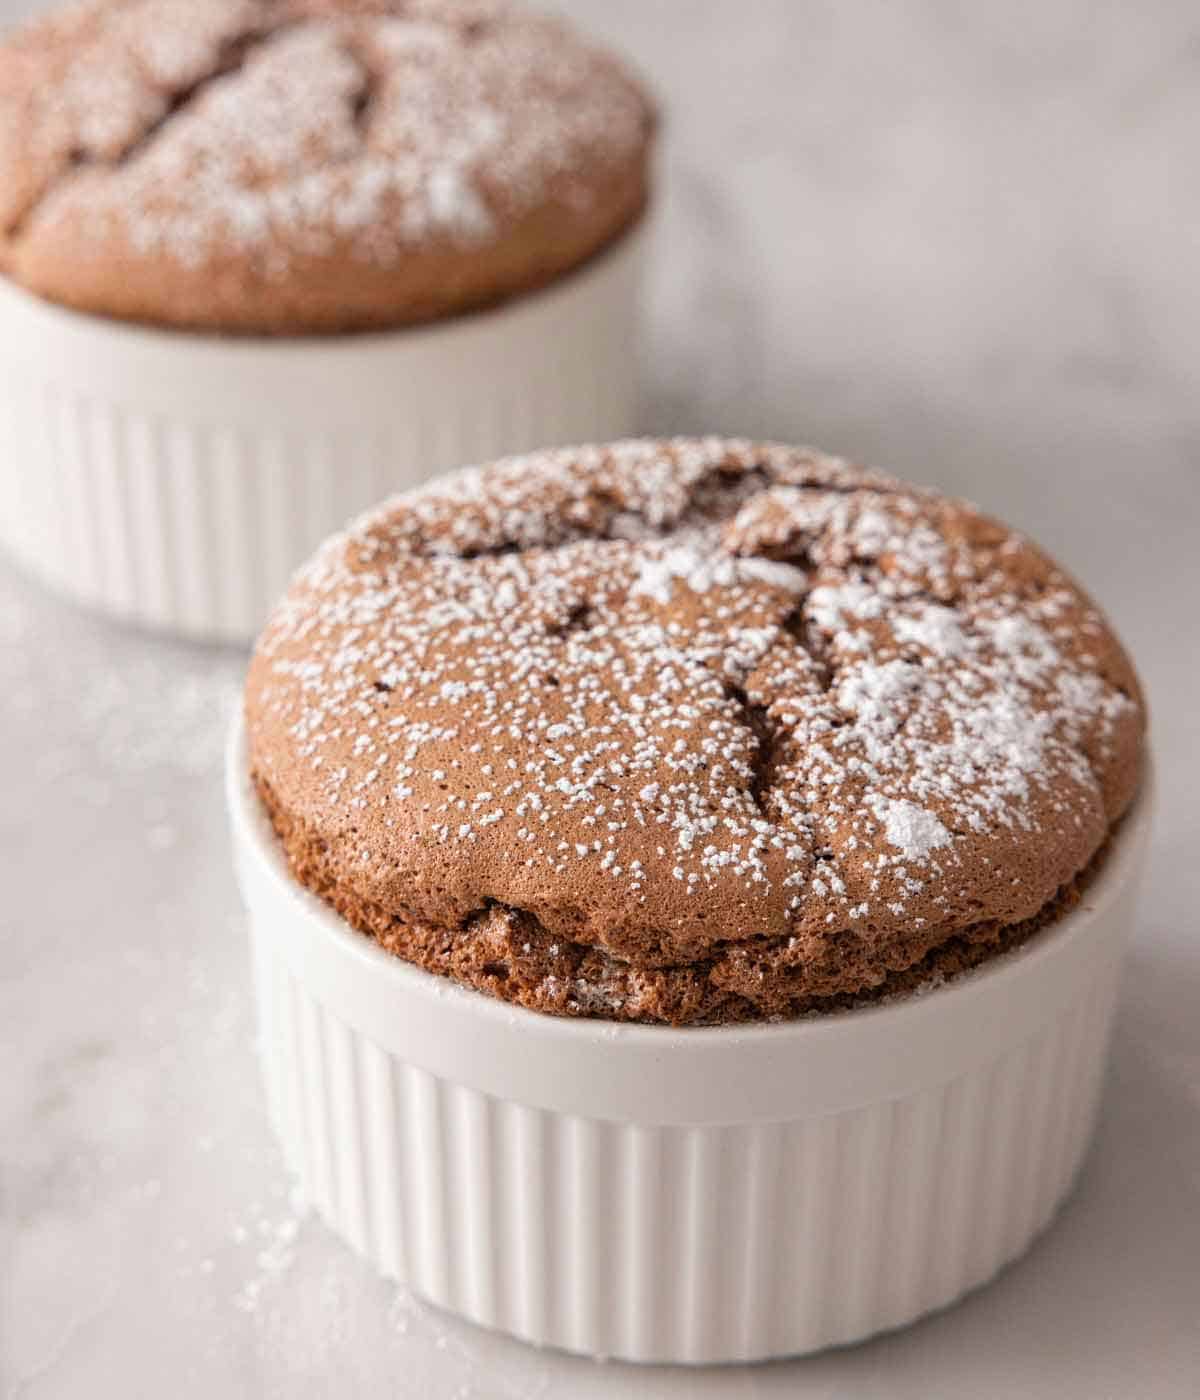 A chocolate souffle with powdered sugar in front of a second one.